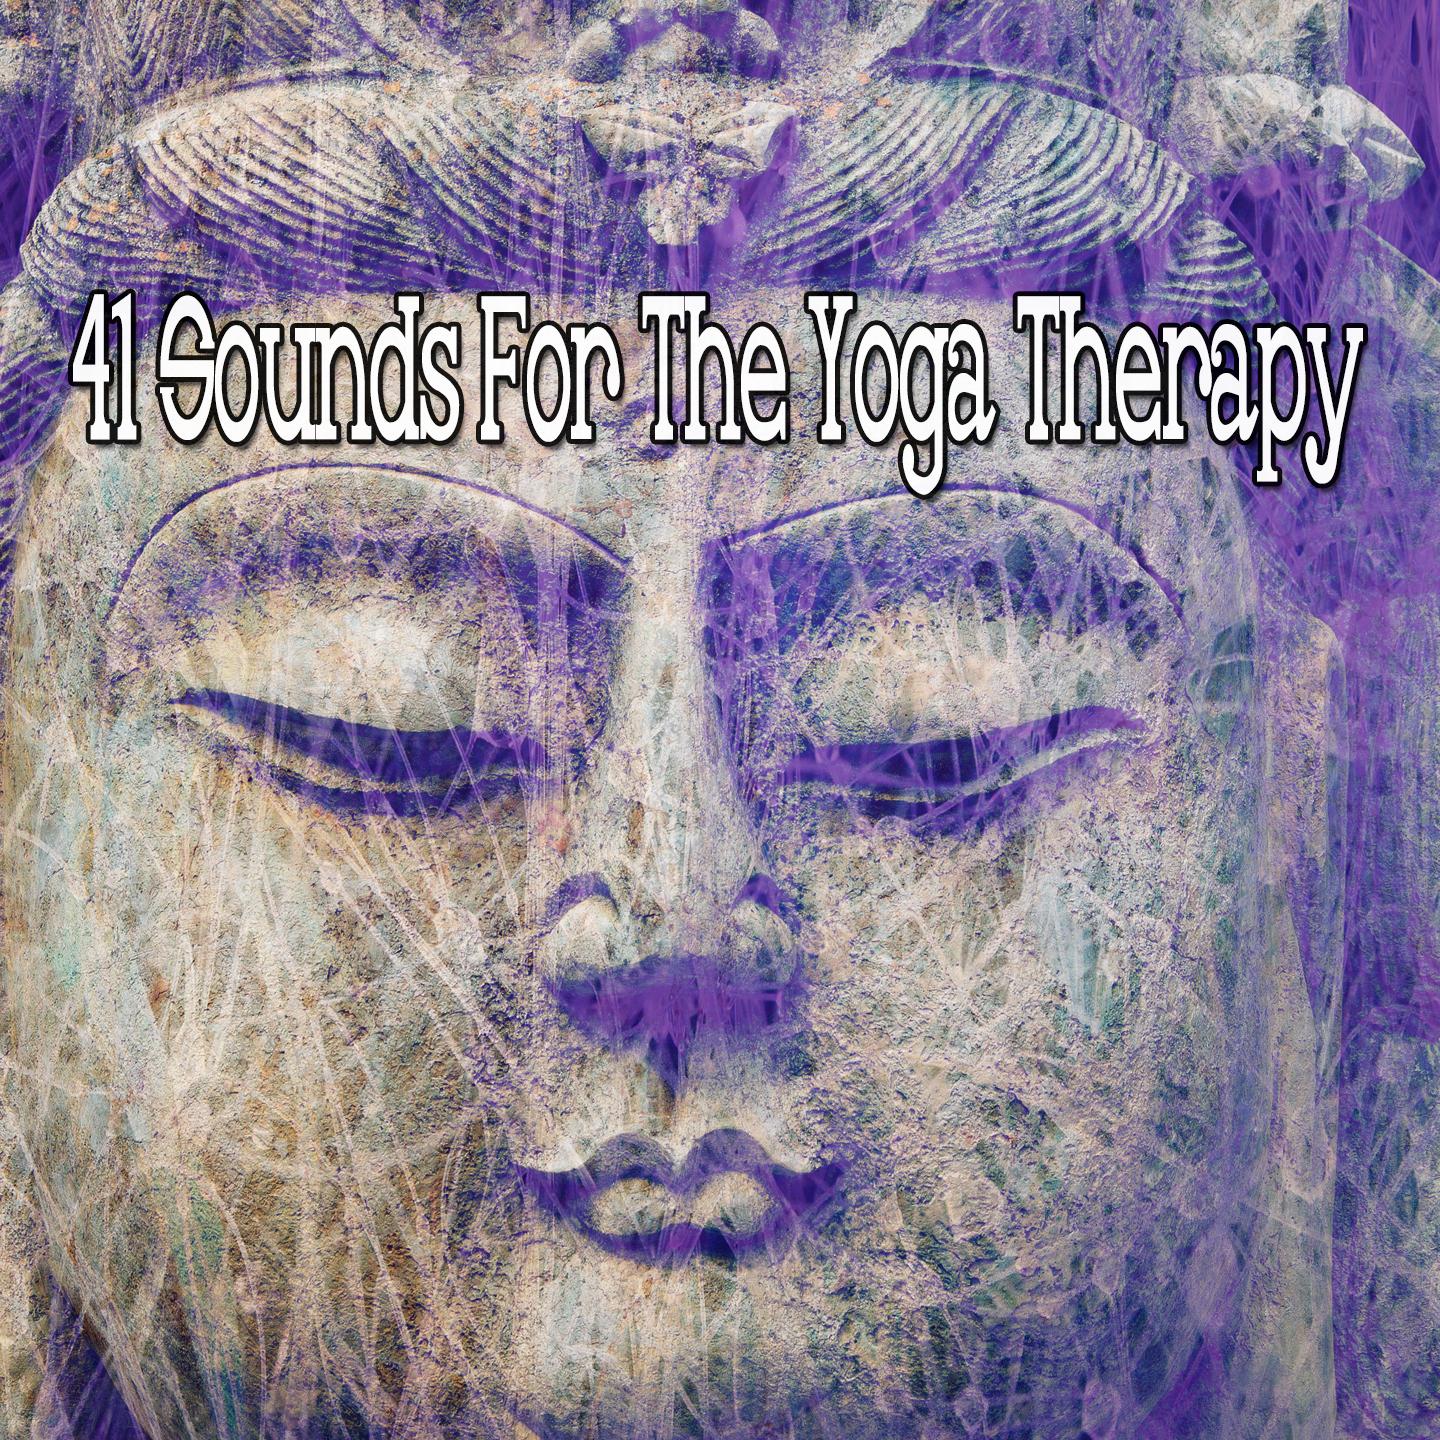 41 Sounds for the Yoga Therapy